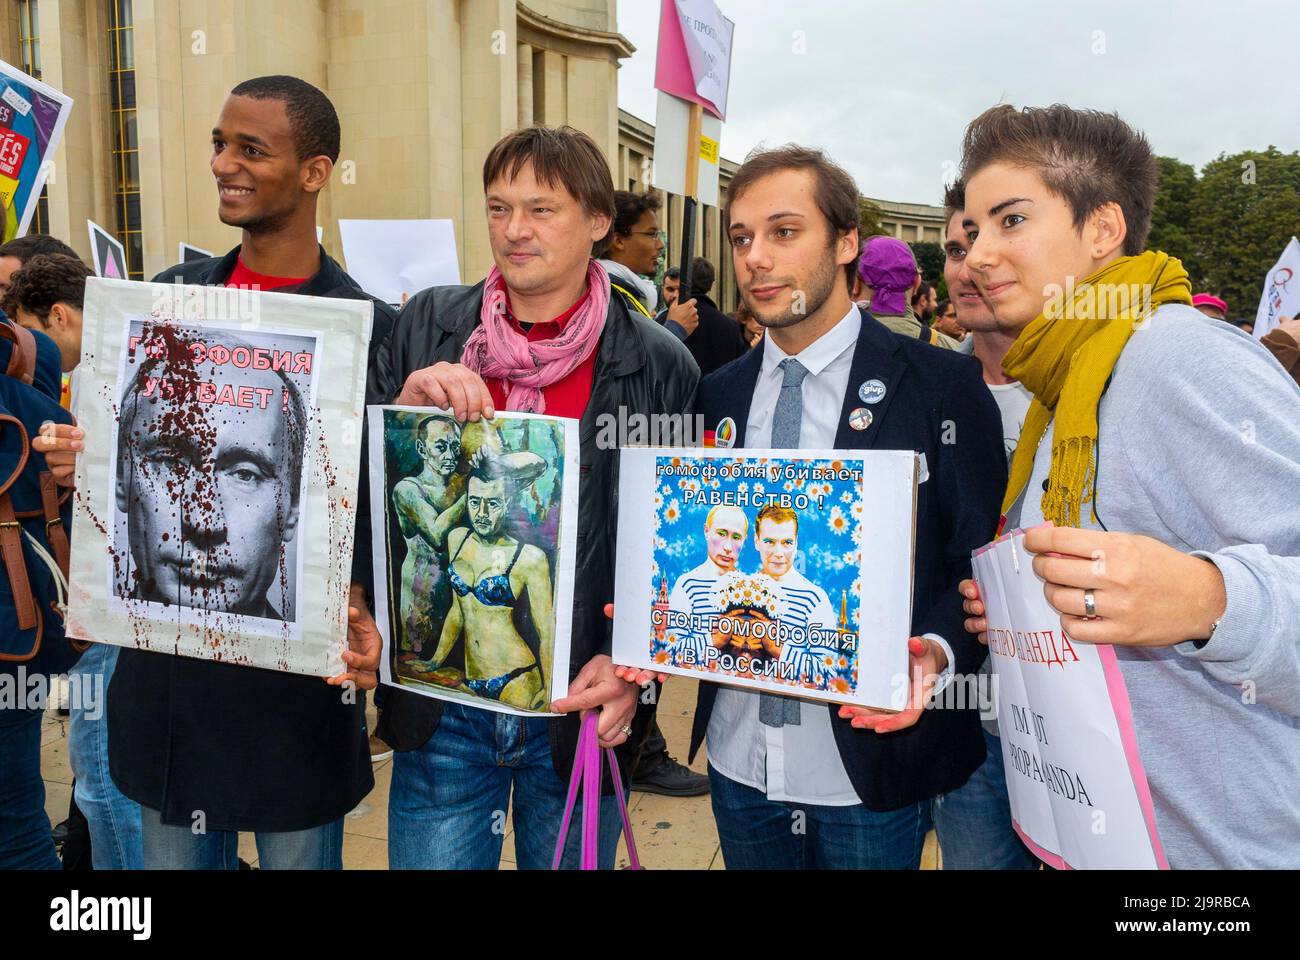 Paris, France, Group of LGBT Activists Holding Posters of Russian President Vladimir Putin, at N.G.O., Protest Against Homophobia in Russia, Demonstration, putin image Stock Photo